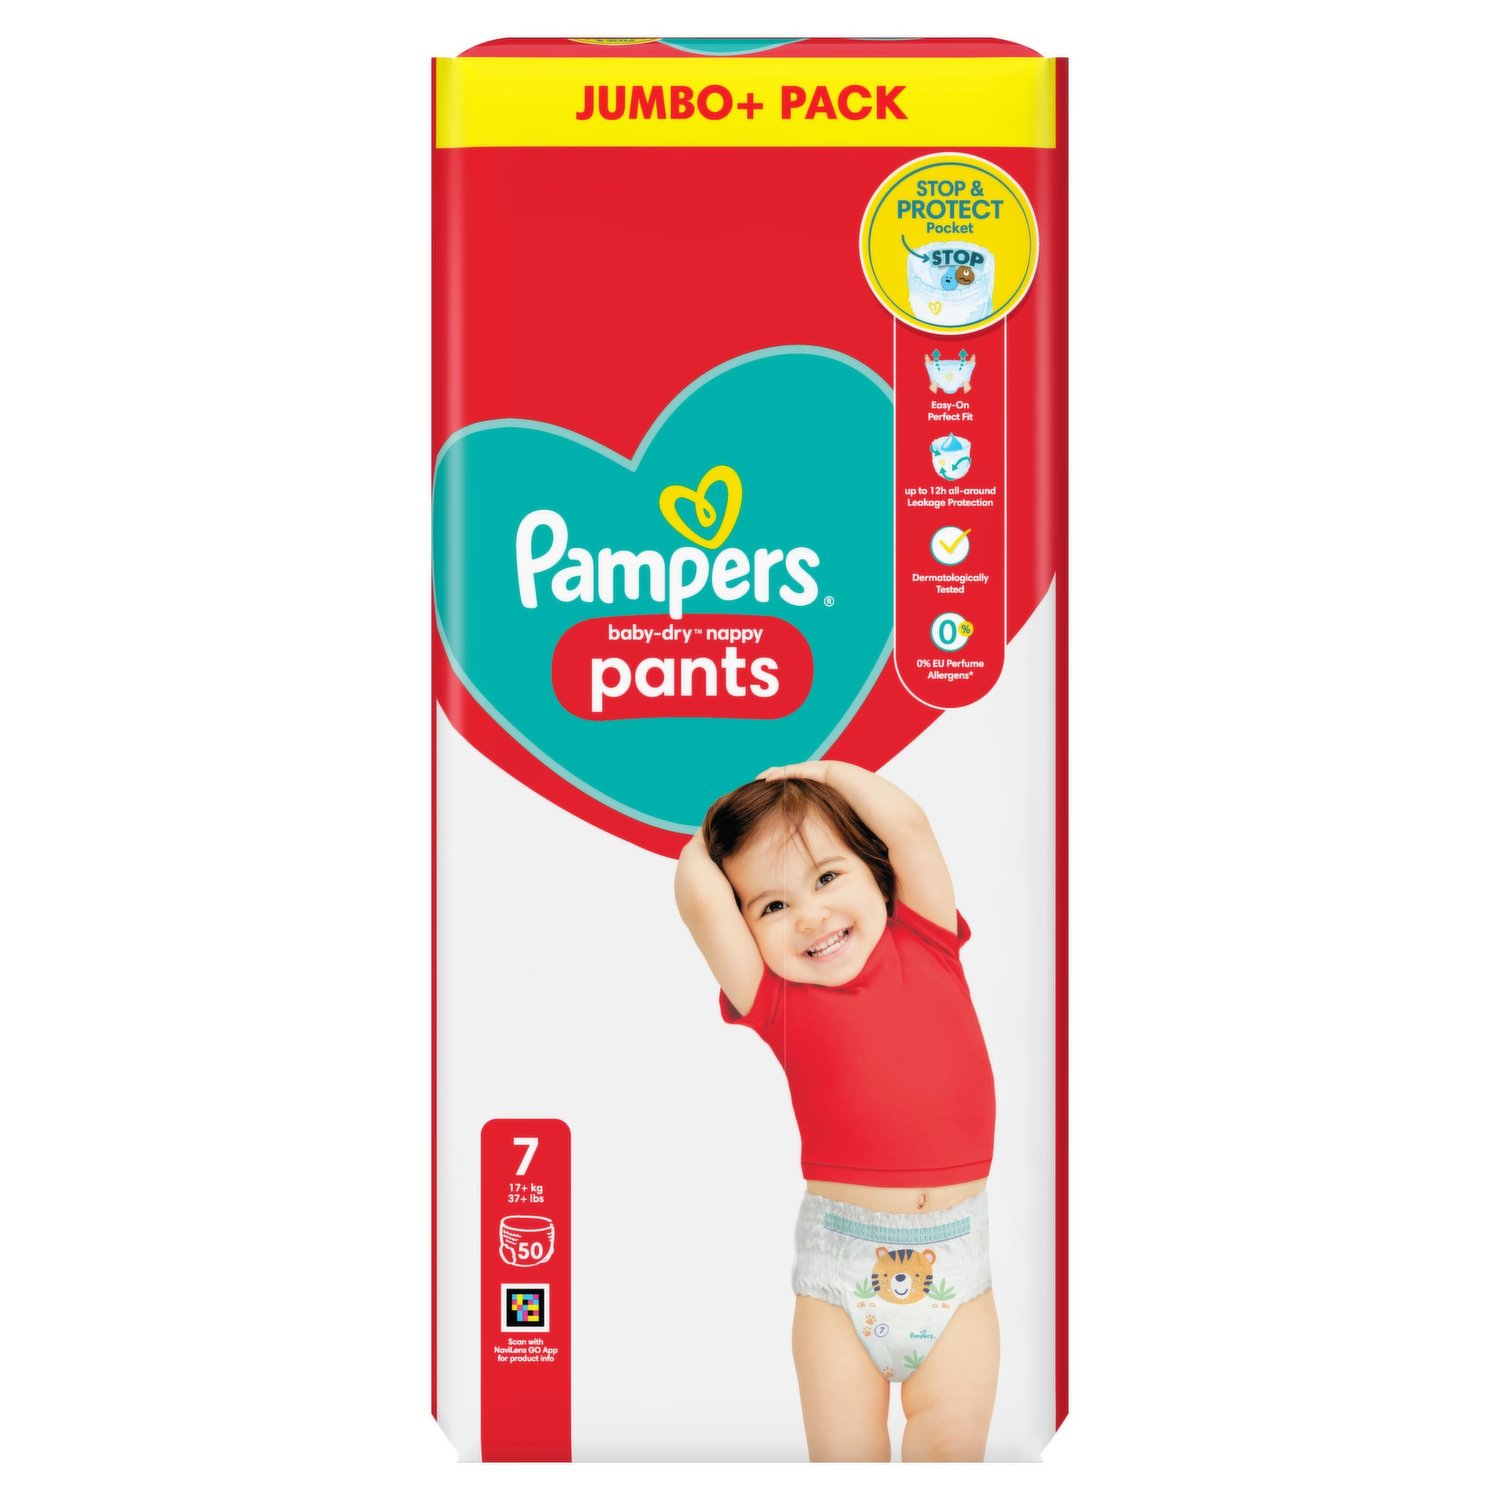 Dodot Pants baby dry Jumbo Pack, sizes 4, 5, 6, 7, 92 to 132 disposable  baby diapers, 12 hours dryness, fit 360, Pack saving